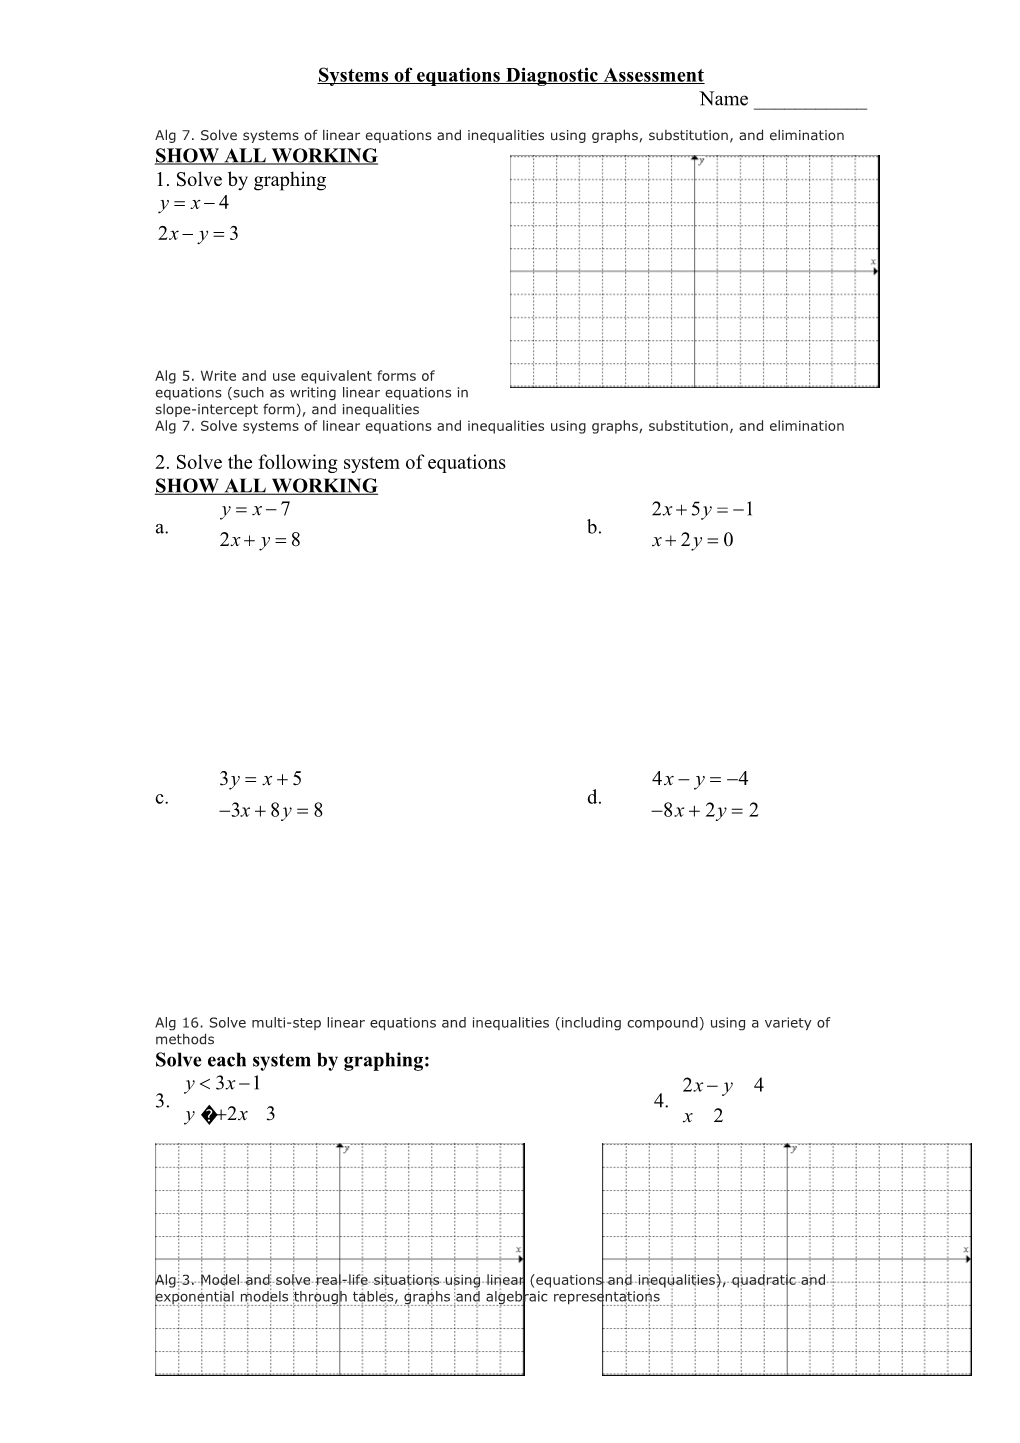 Solve by Graphing: ( Use the Separate Sheet of Grid Paper )